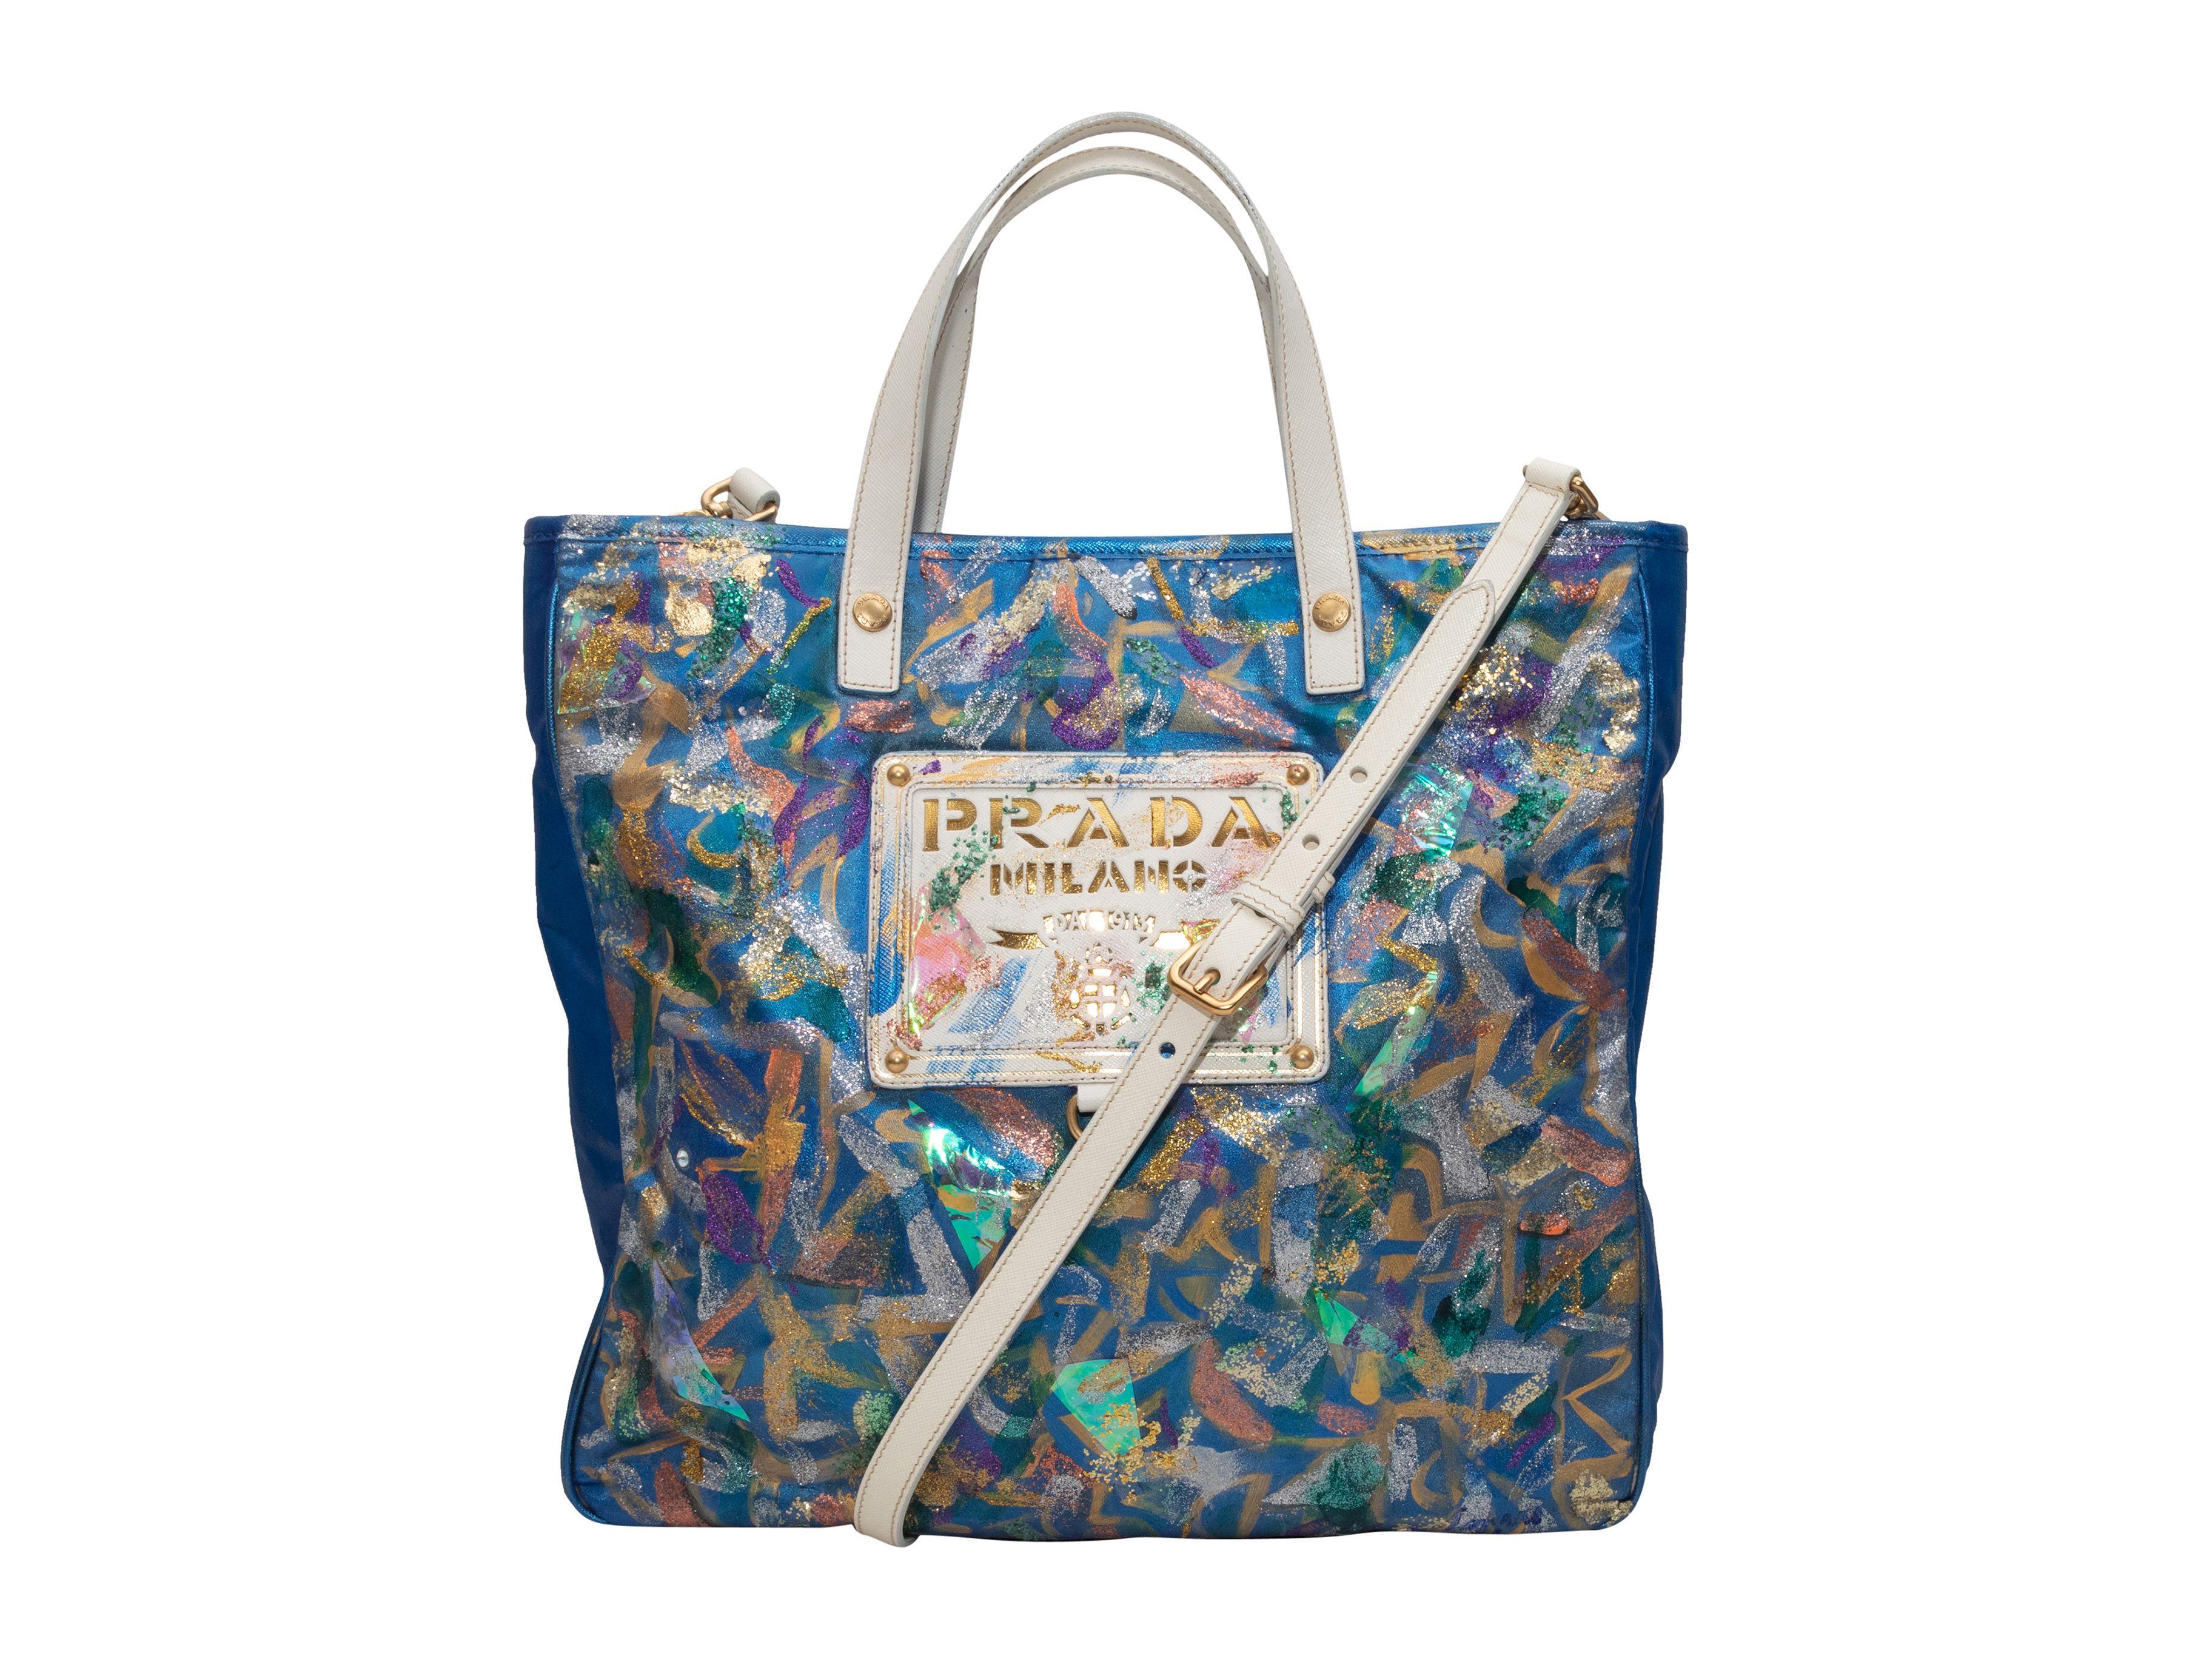 Prada Blue & Multicolor Hand-Painted Tote by Juliana Lazzaro For Safe Horizon 1